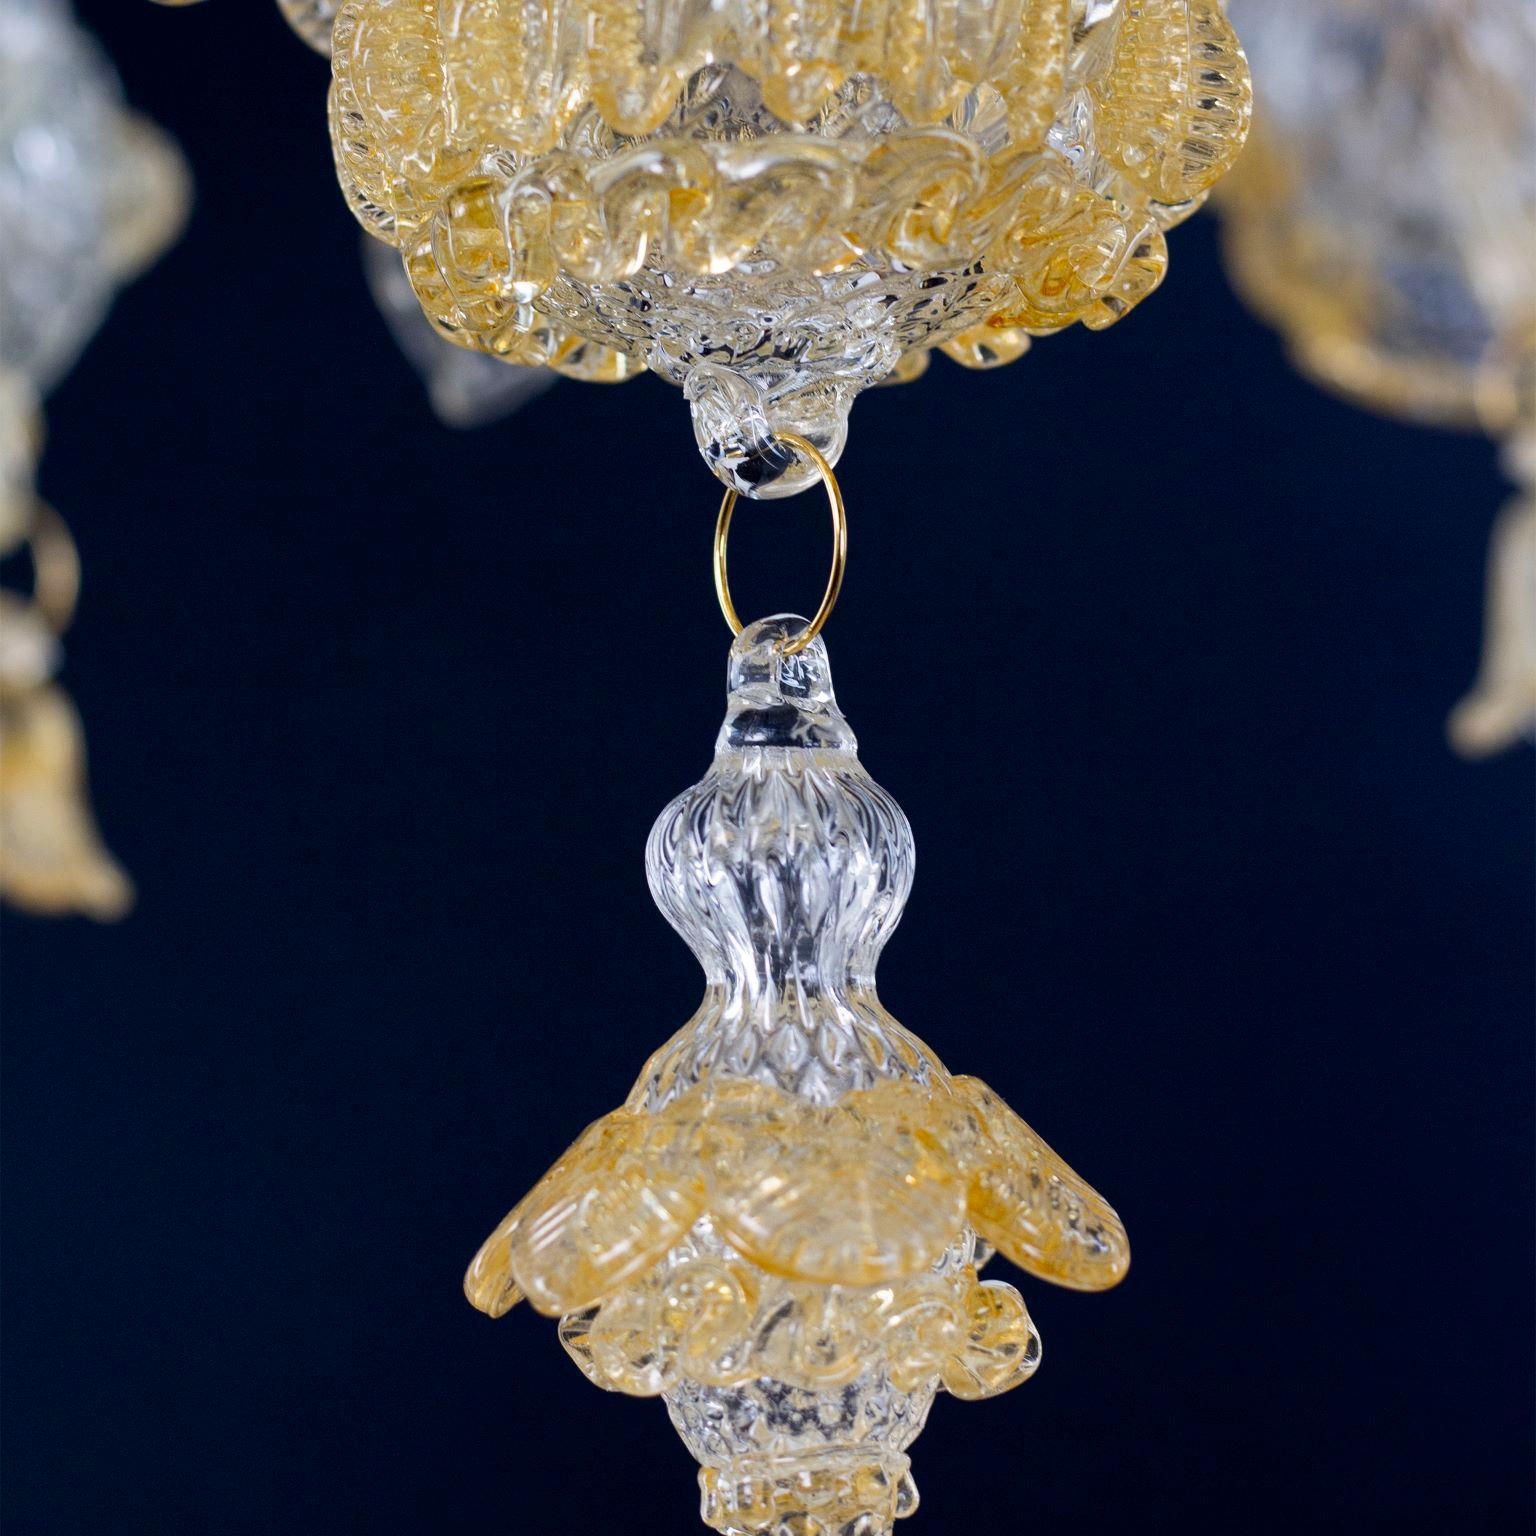 Contemporary Italian Rezzonico Chandelier 6 Arms Murano Crystal, Amber Glass by Multiforme For Sale